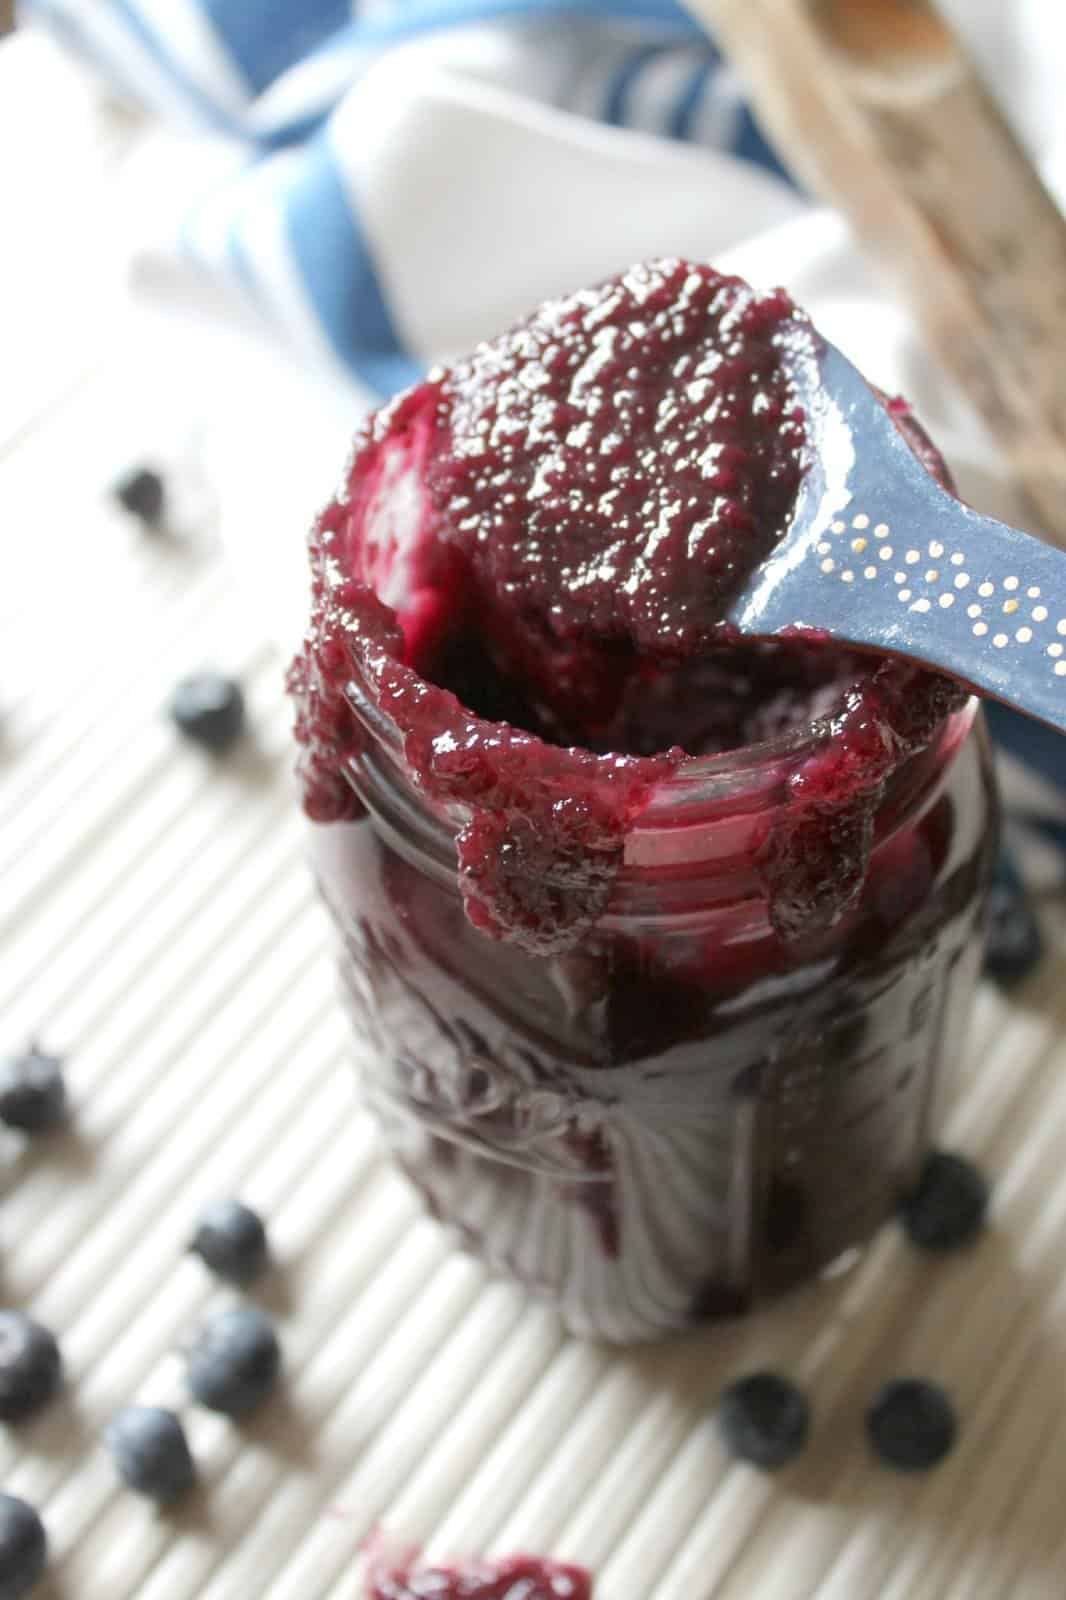 A blue ceramic spoon scooping out blueberry bbq sauce to show texture.